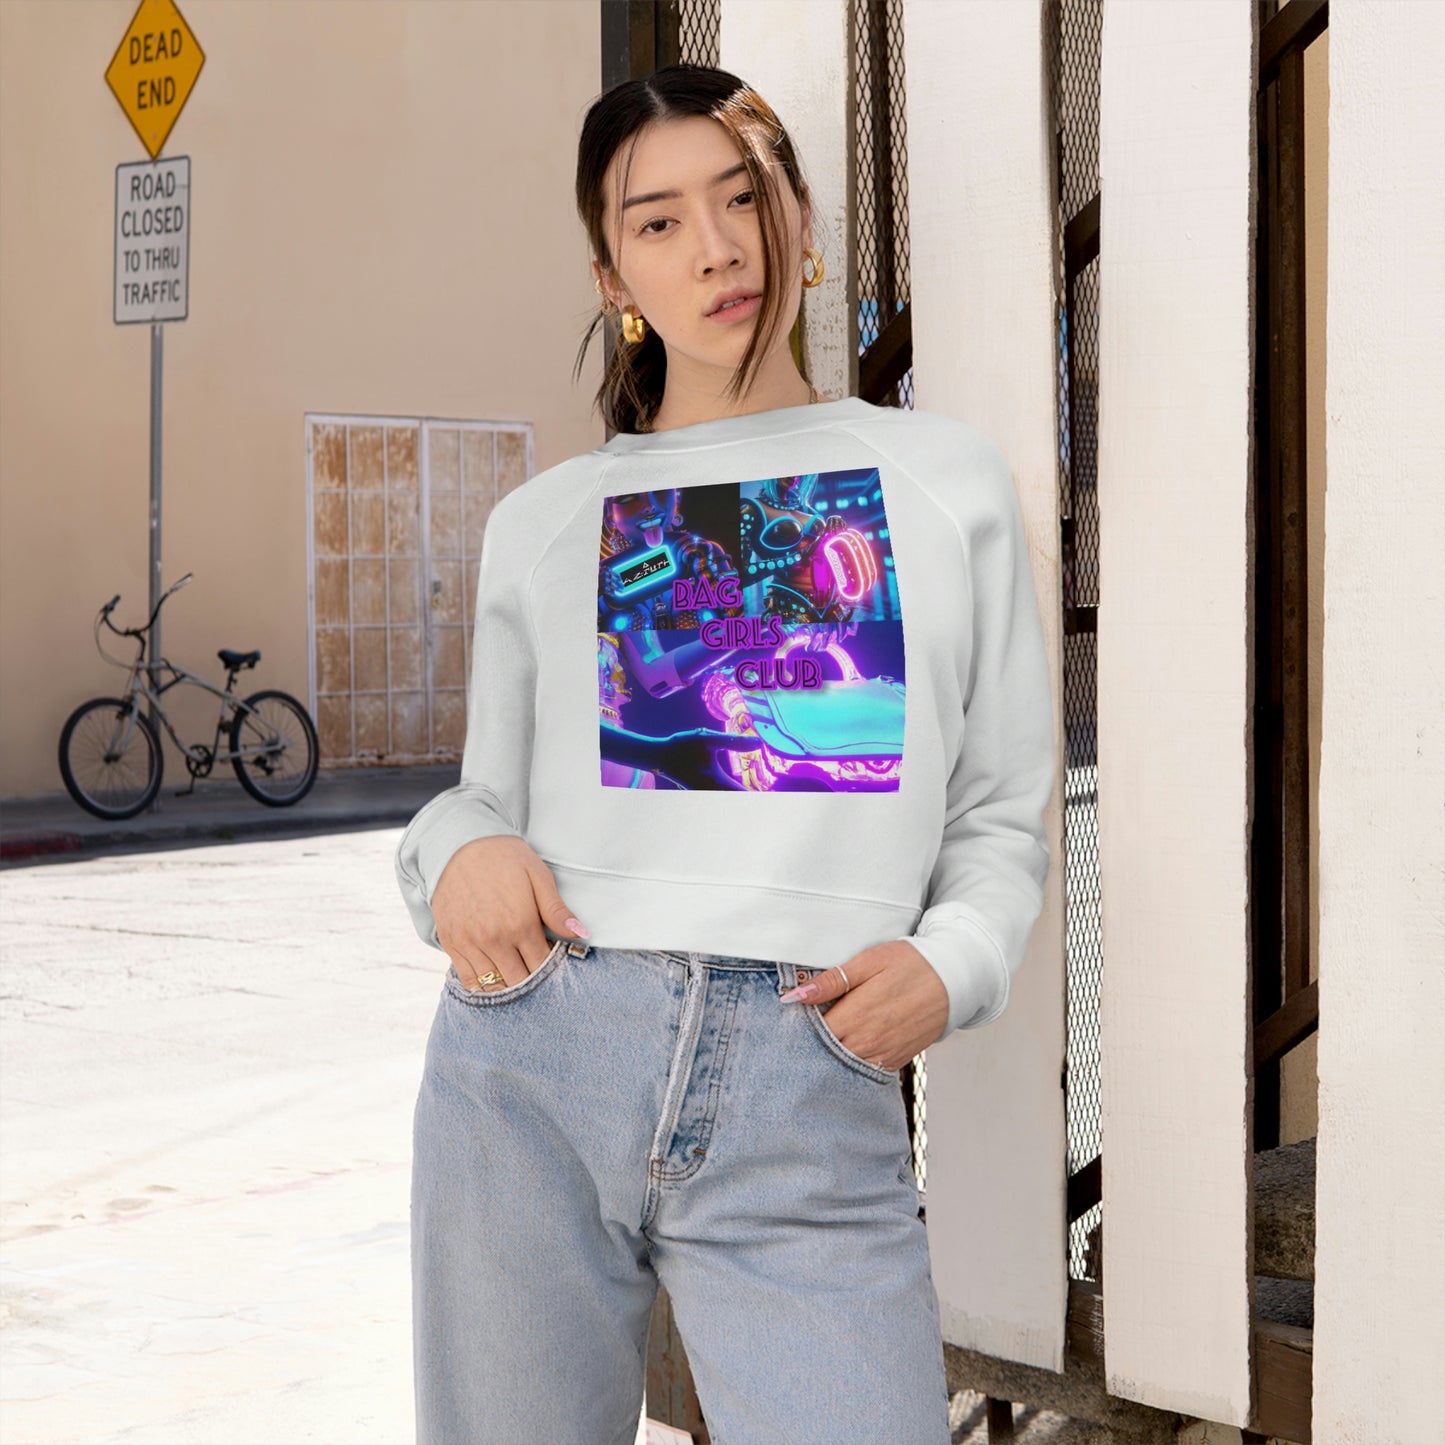 Atziluth Gallery Womens Cropped Sweater "Bag Girls Club"